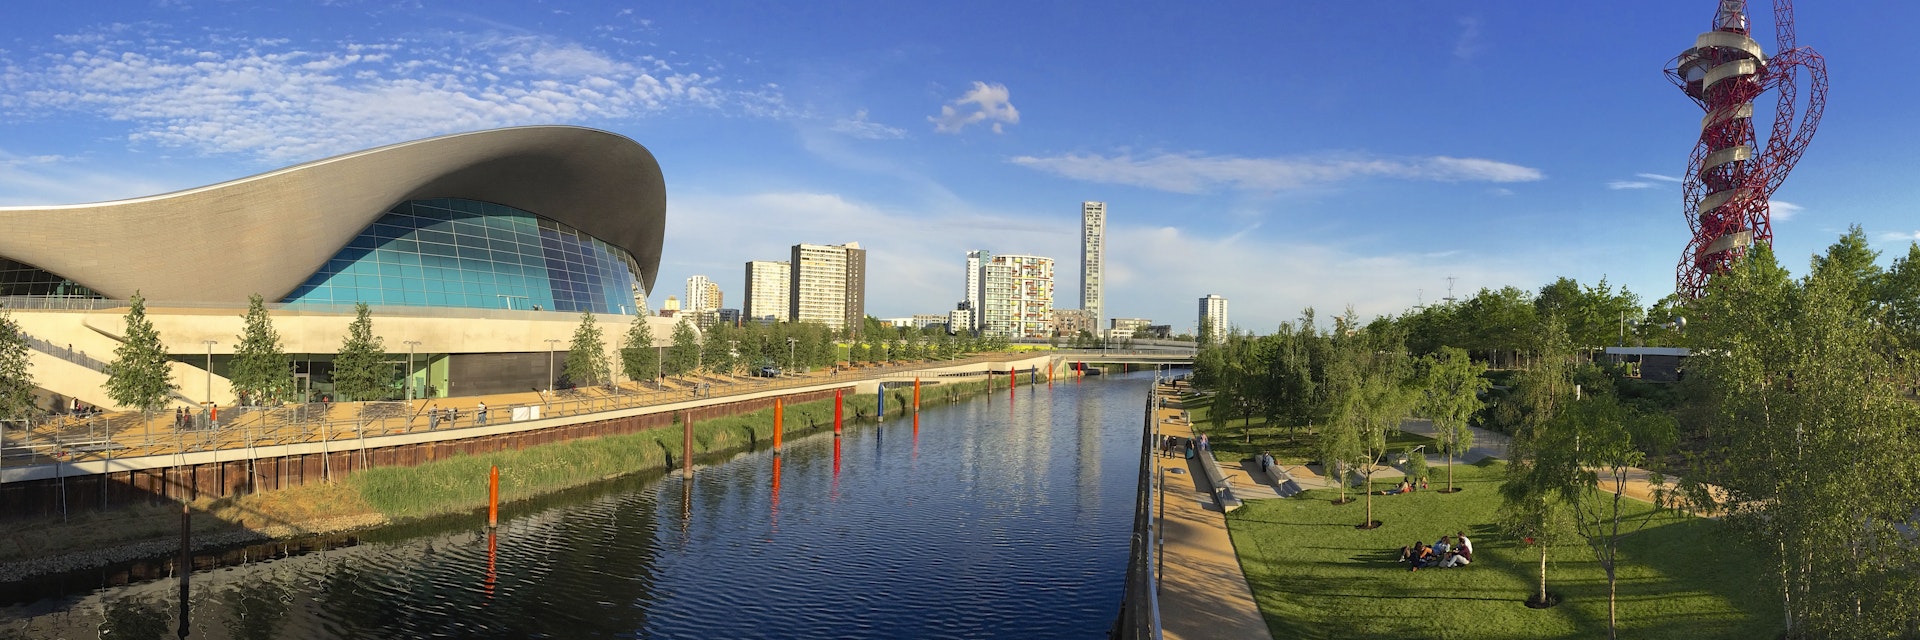 [UNVERIFIED CONTENT] Queen Elizabeth Olympic Park 2012 with Aquatics Centre, the Orbit and the River Lea, Stratford, London, UK